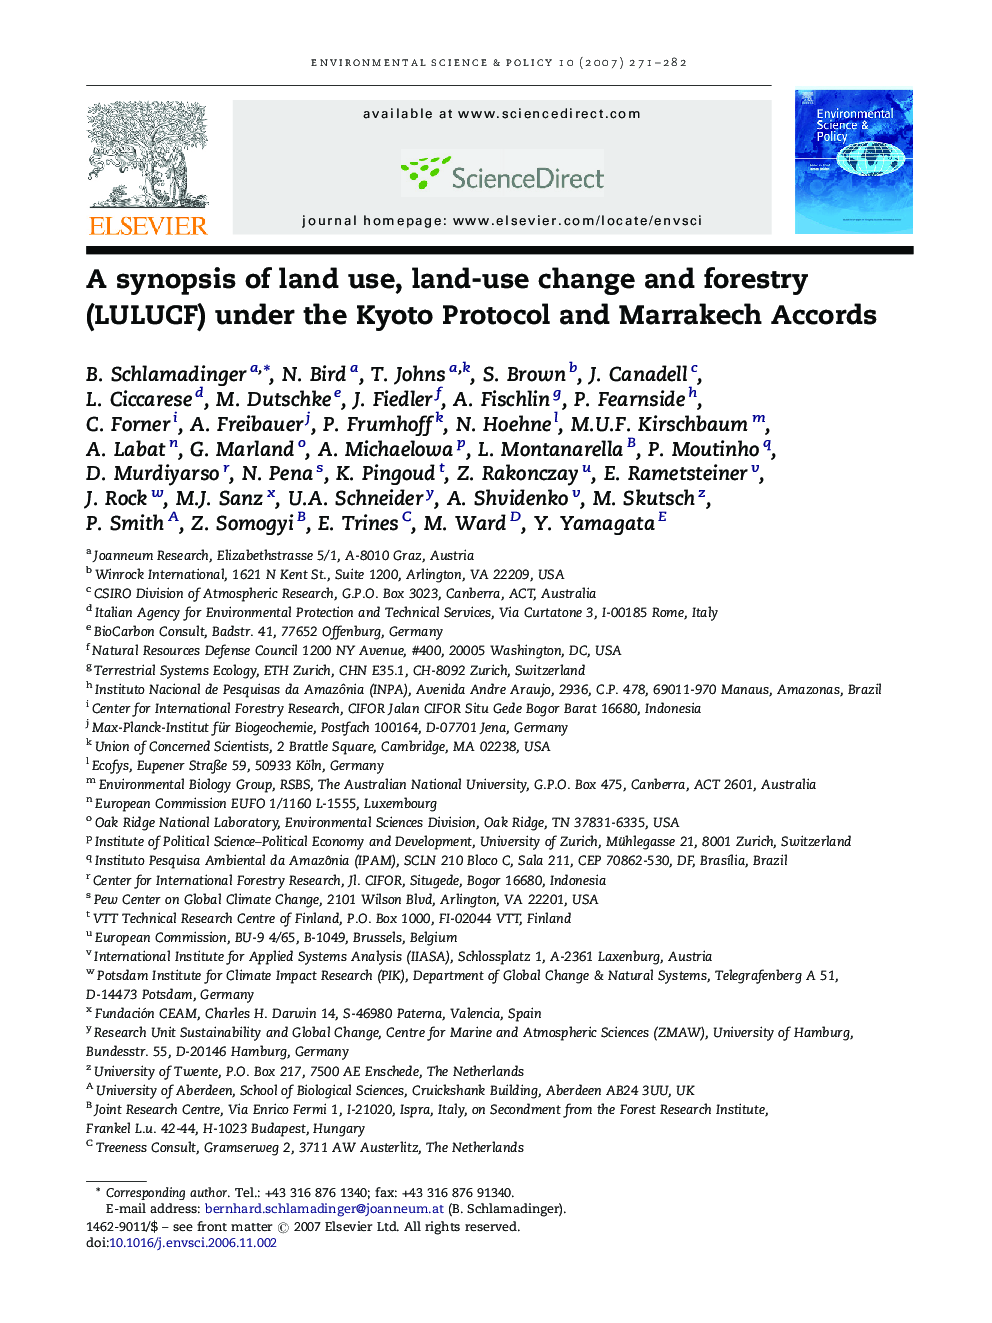 A synopsis of land use, land-use change and forestry (LULUCF) under the Kyoto Protocol and Marrakech Accords